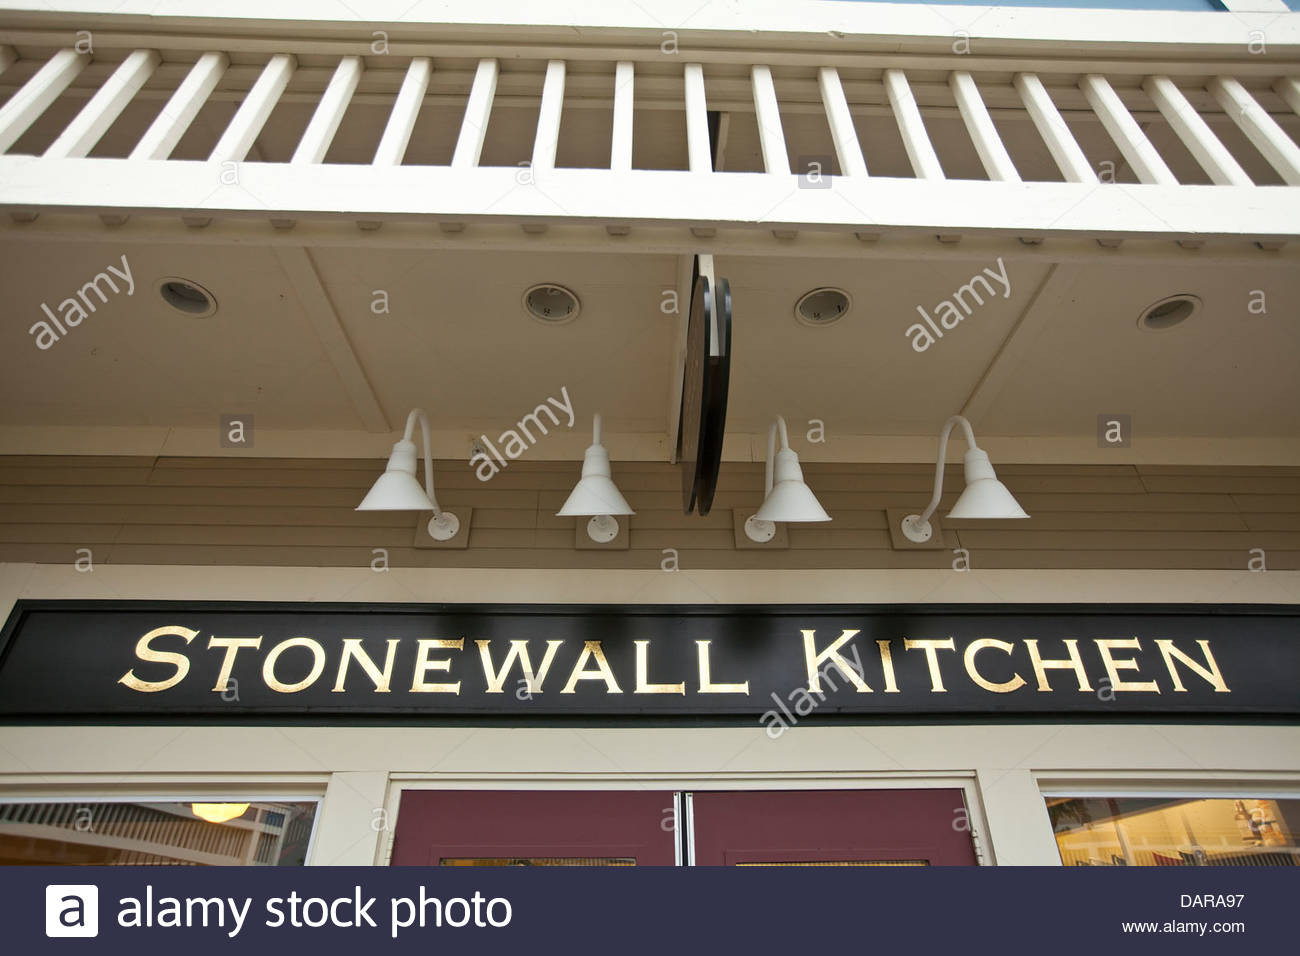 Stonewall Kitchen Outlet
 A Stonewall Kitchen store is pictured at the Settlers